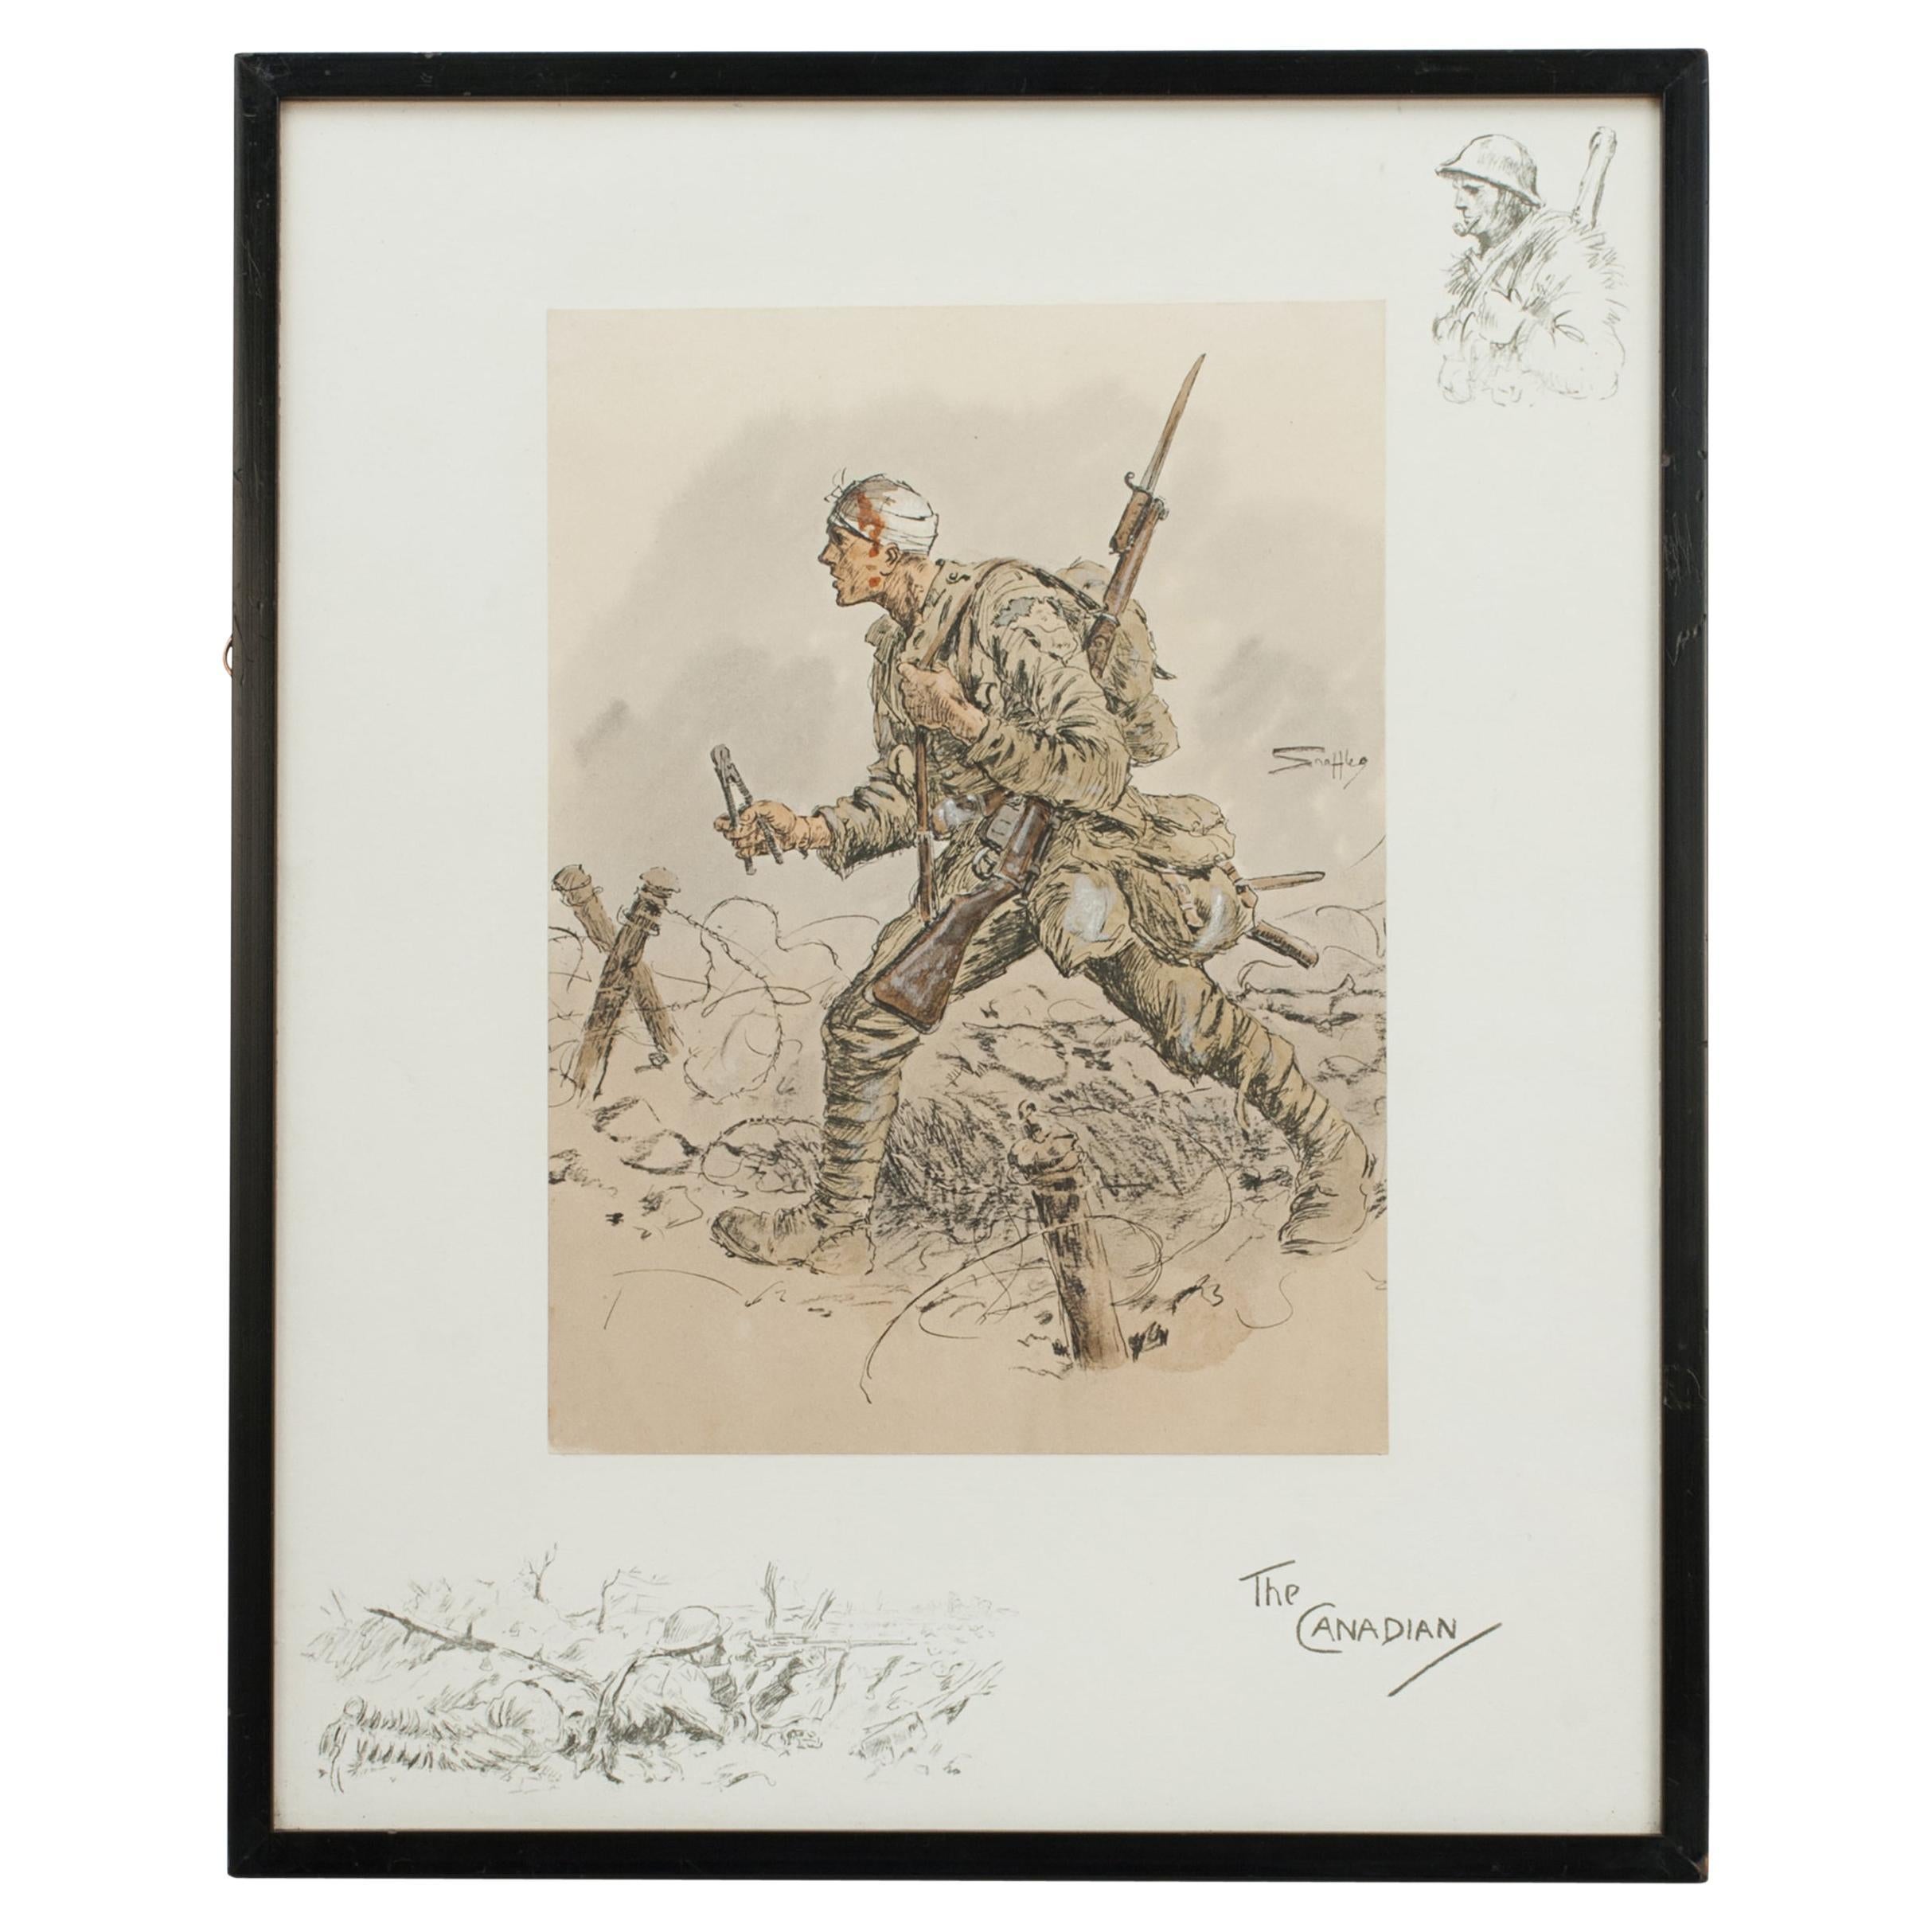 WW1 Military Print, Canadian, by Snaffles For Sale